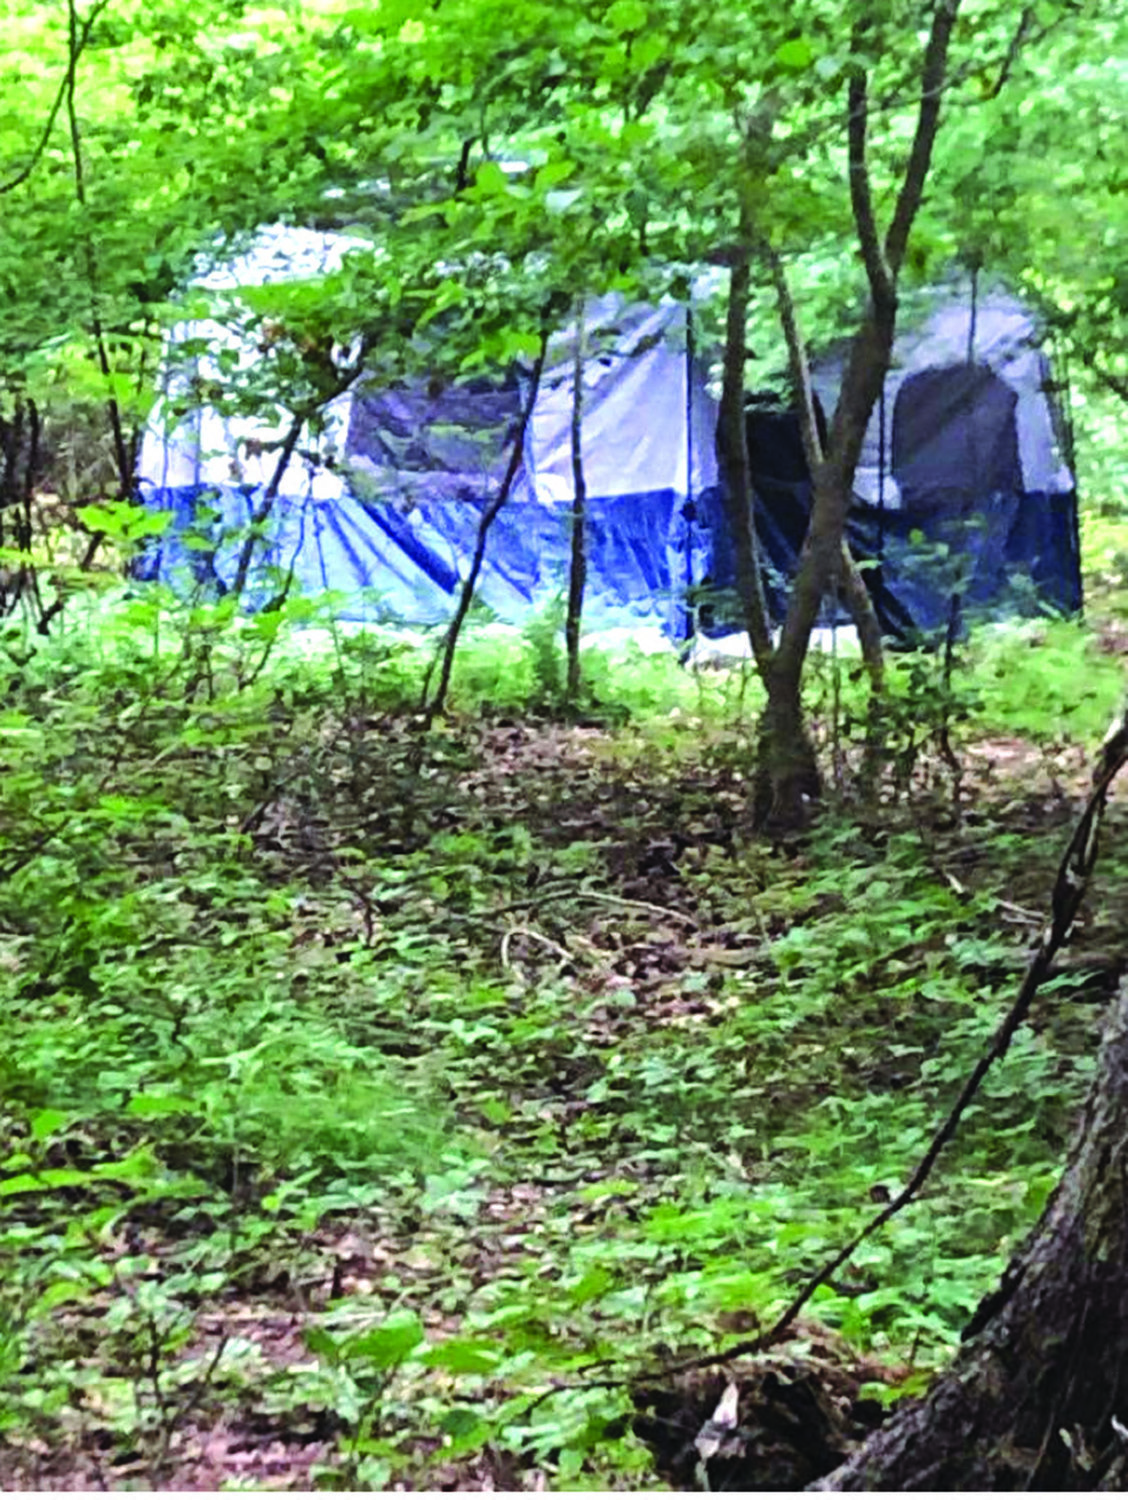 EMPTY CAMP SITE: A visit to one of the campsites in the woods on both sides of the Meadow View walking and bike path on Warwick Neck found a tent but no people on Monday morning. (Warwick Beacon photo)